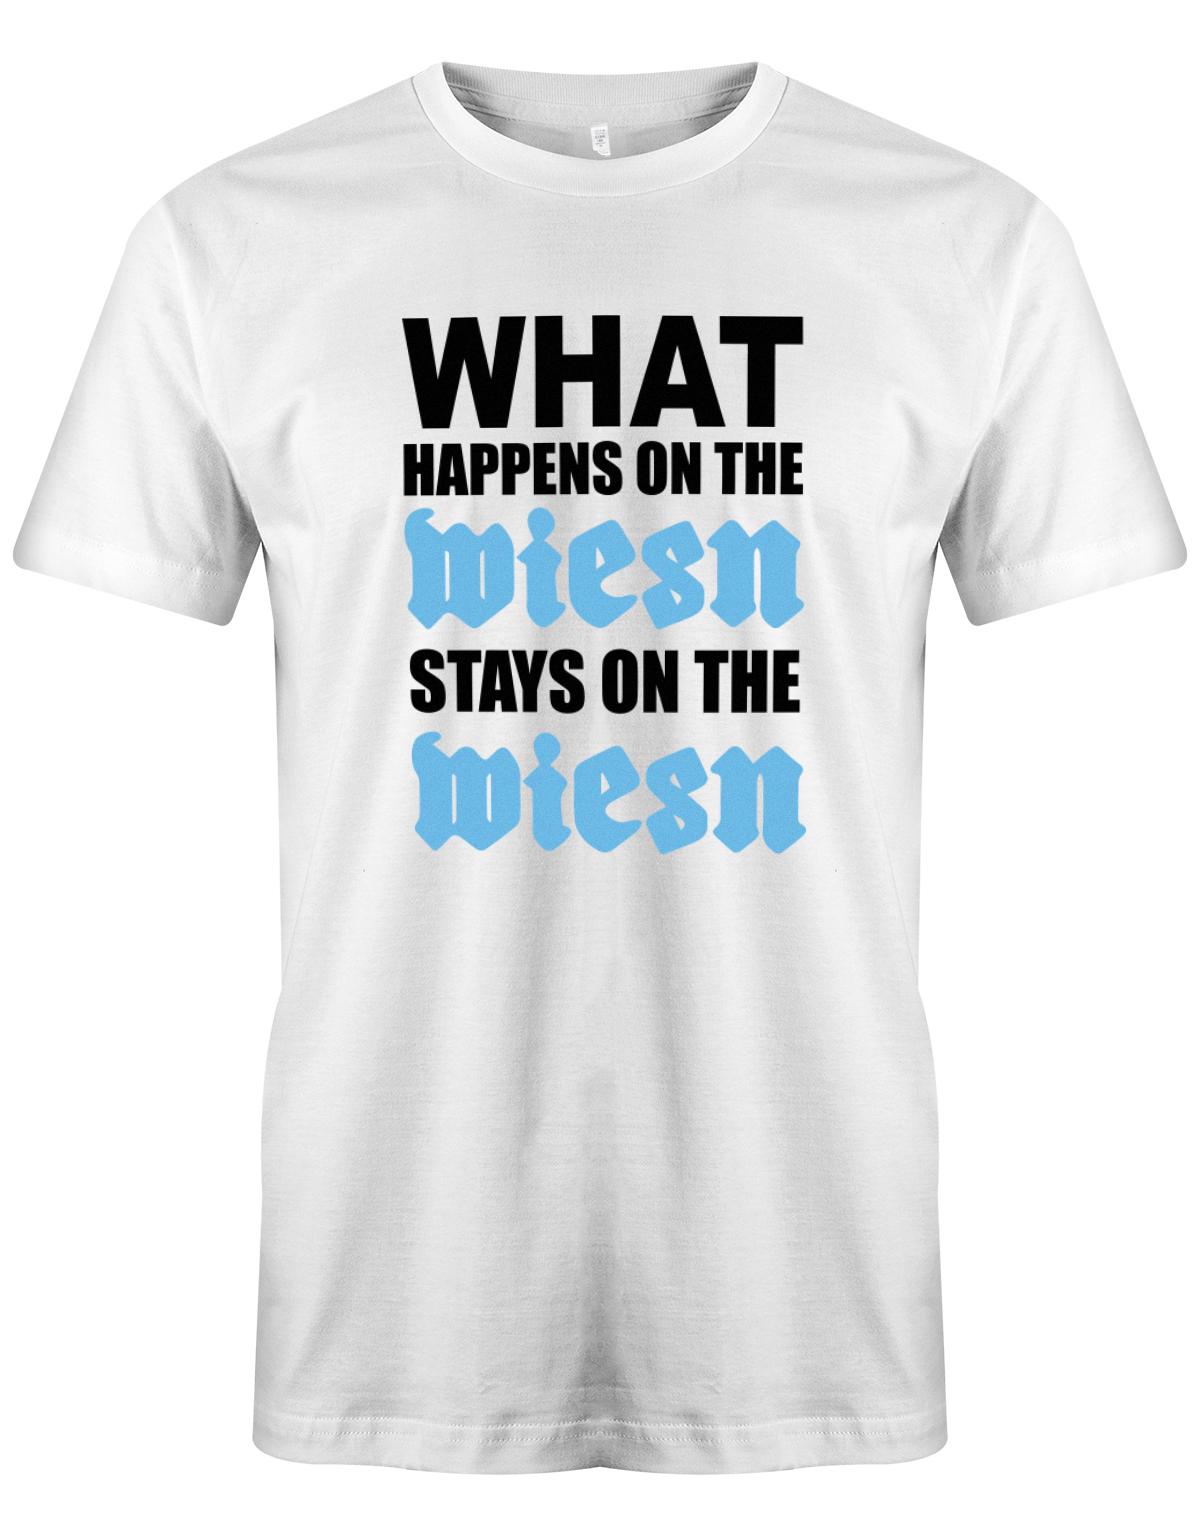 What-happens-on-the-wiesn-stay-on-the-wiesn-herren-shirt-weiss